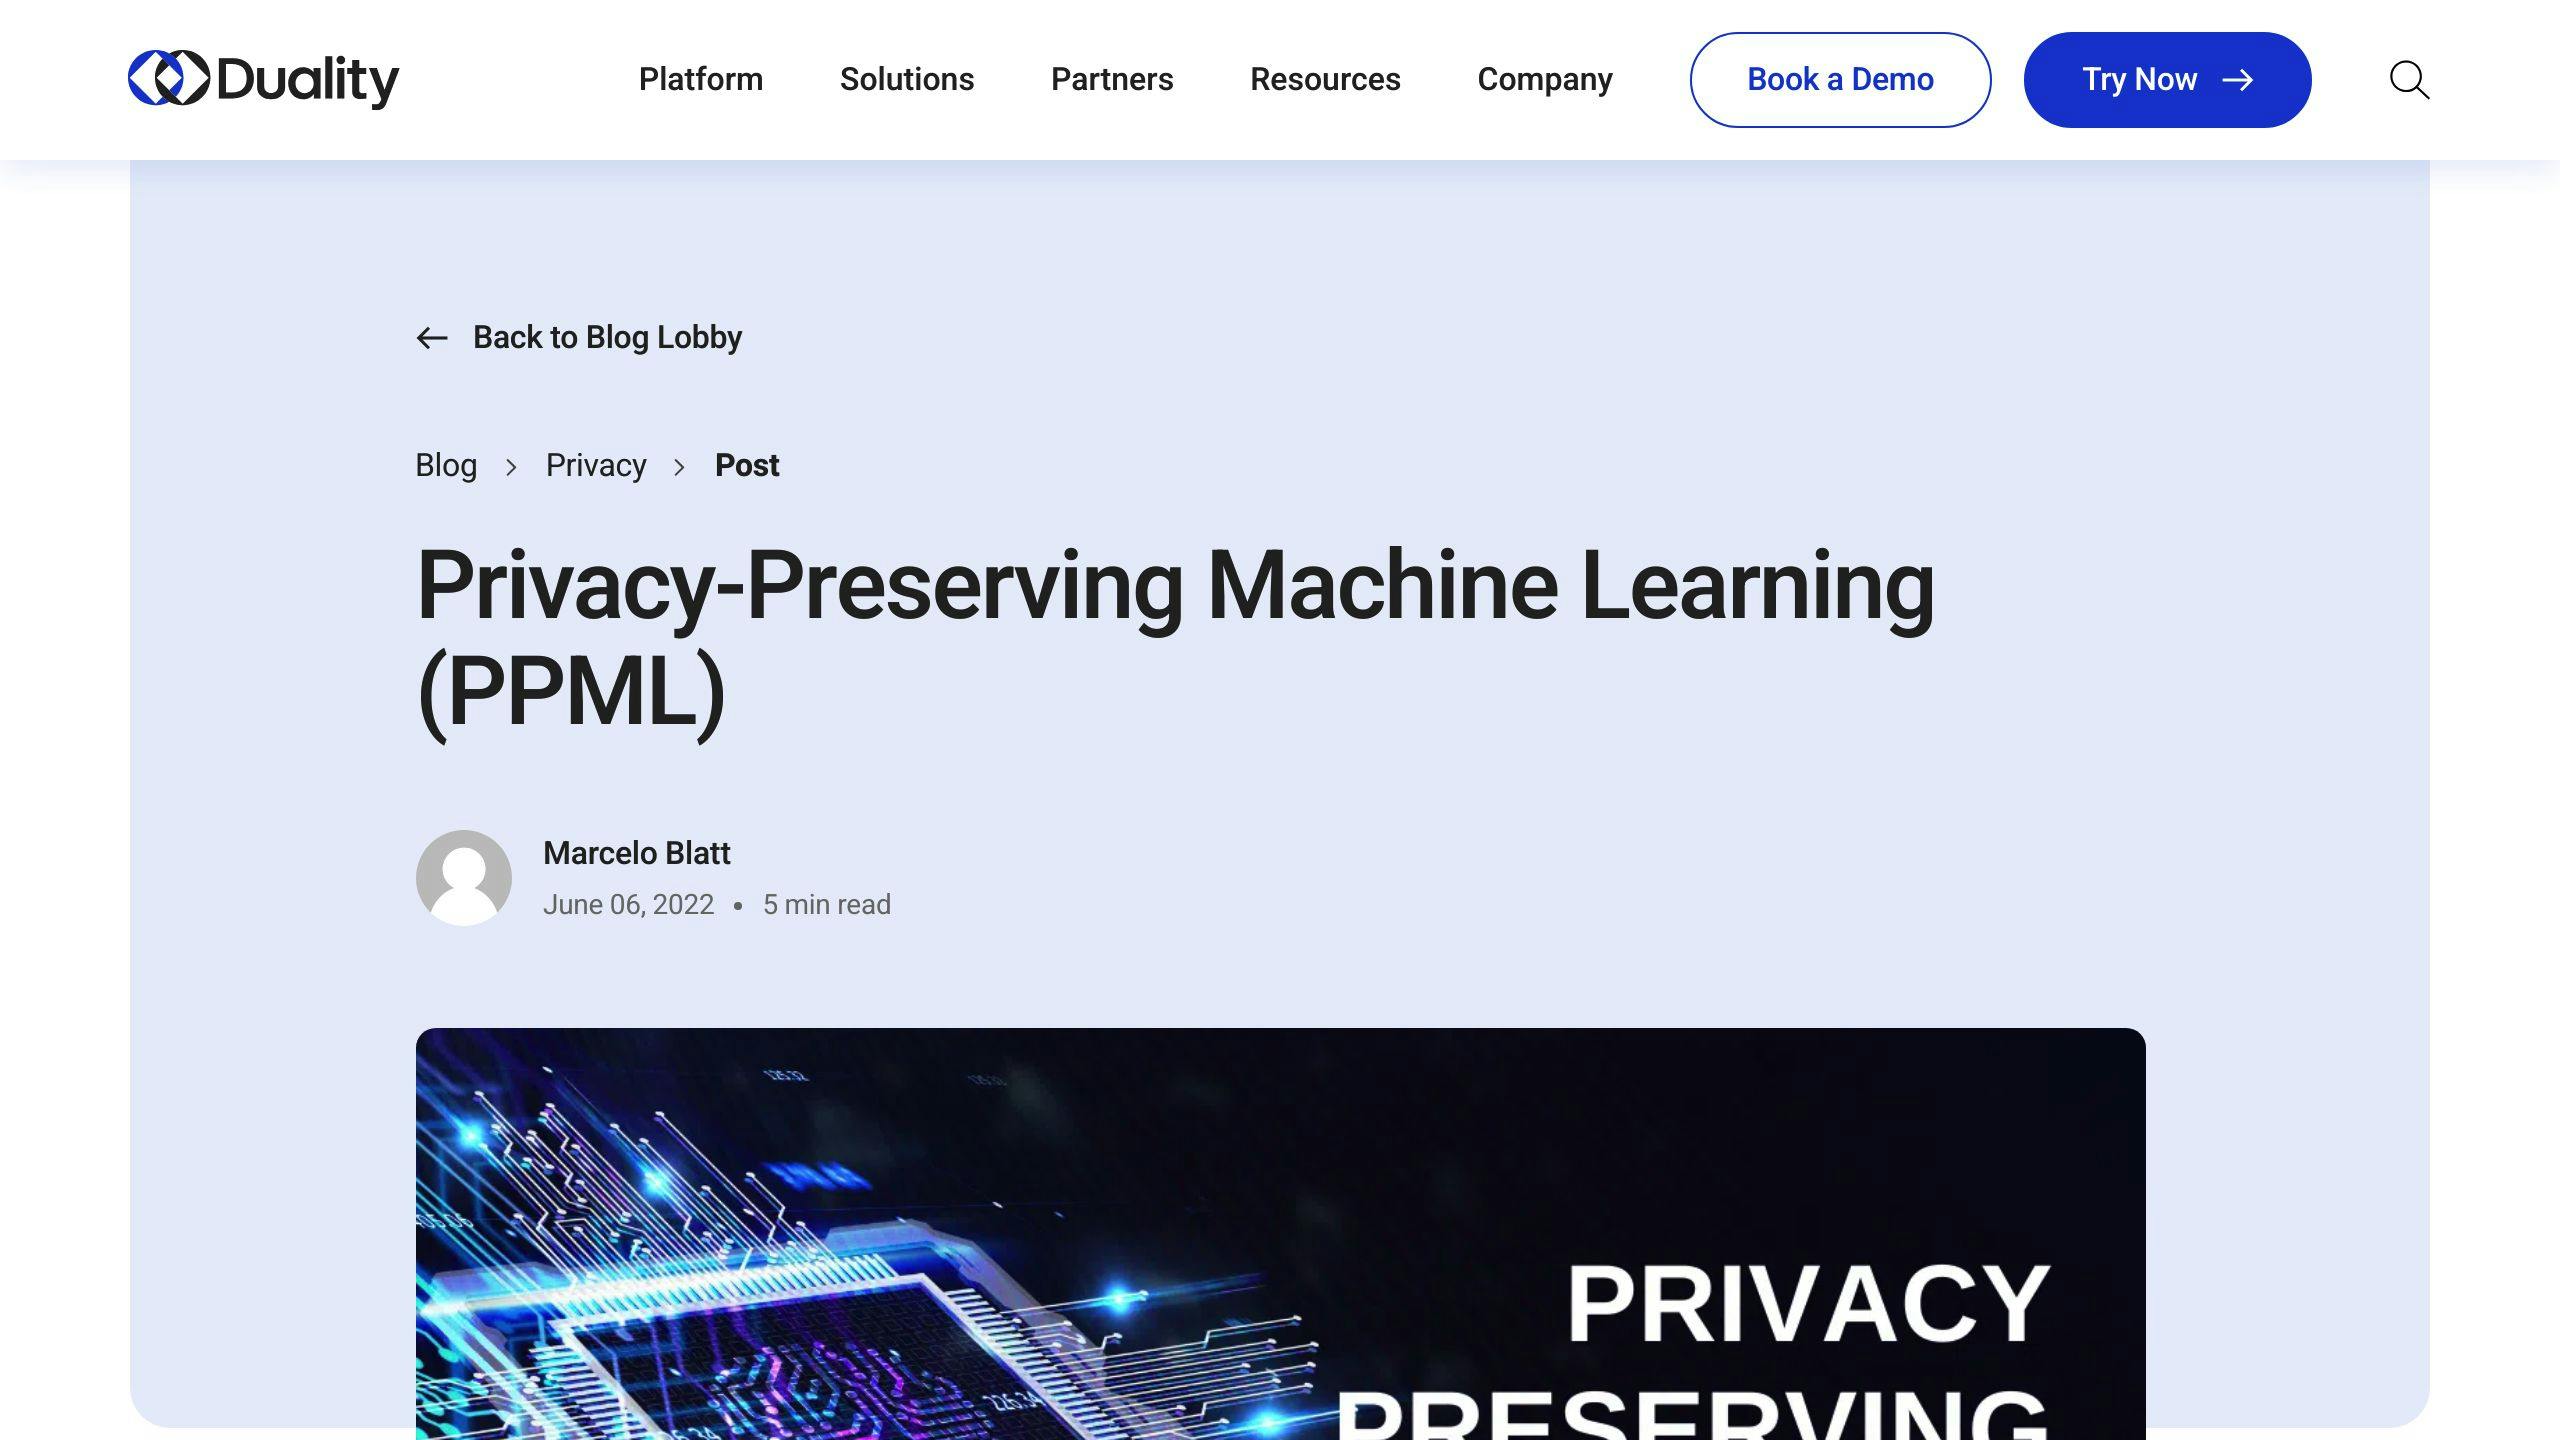 Privacy-Preserving Machine Learning